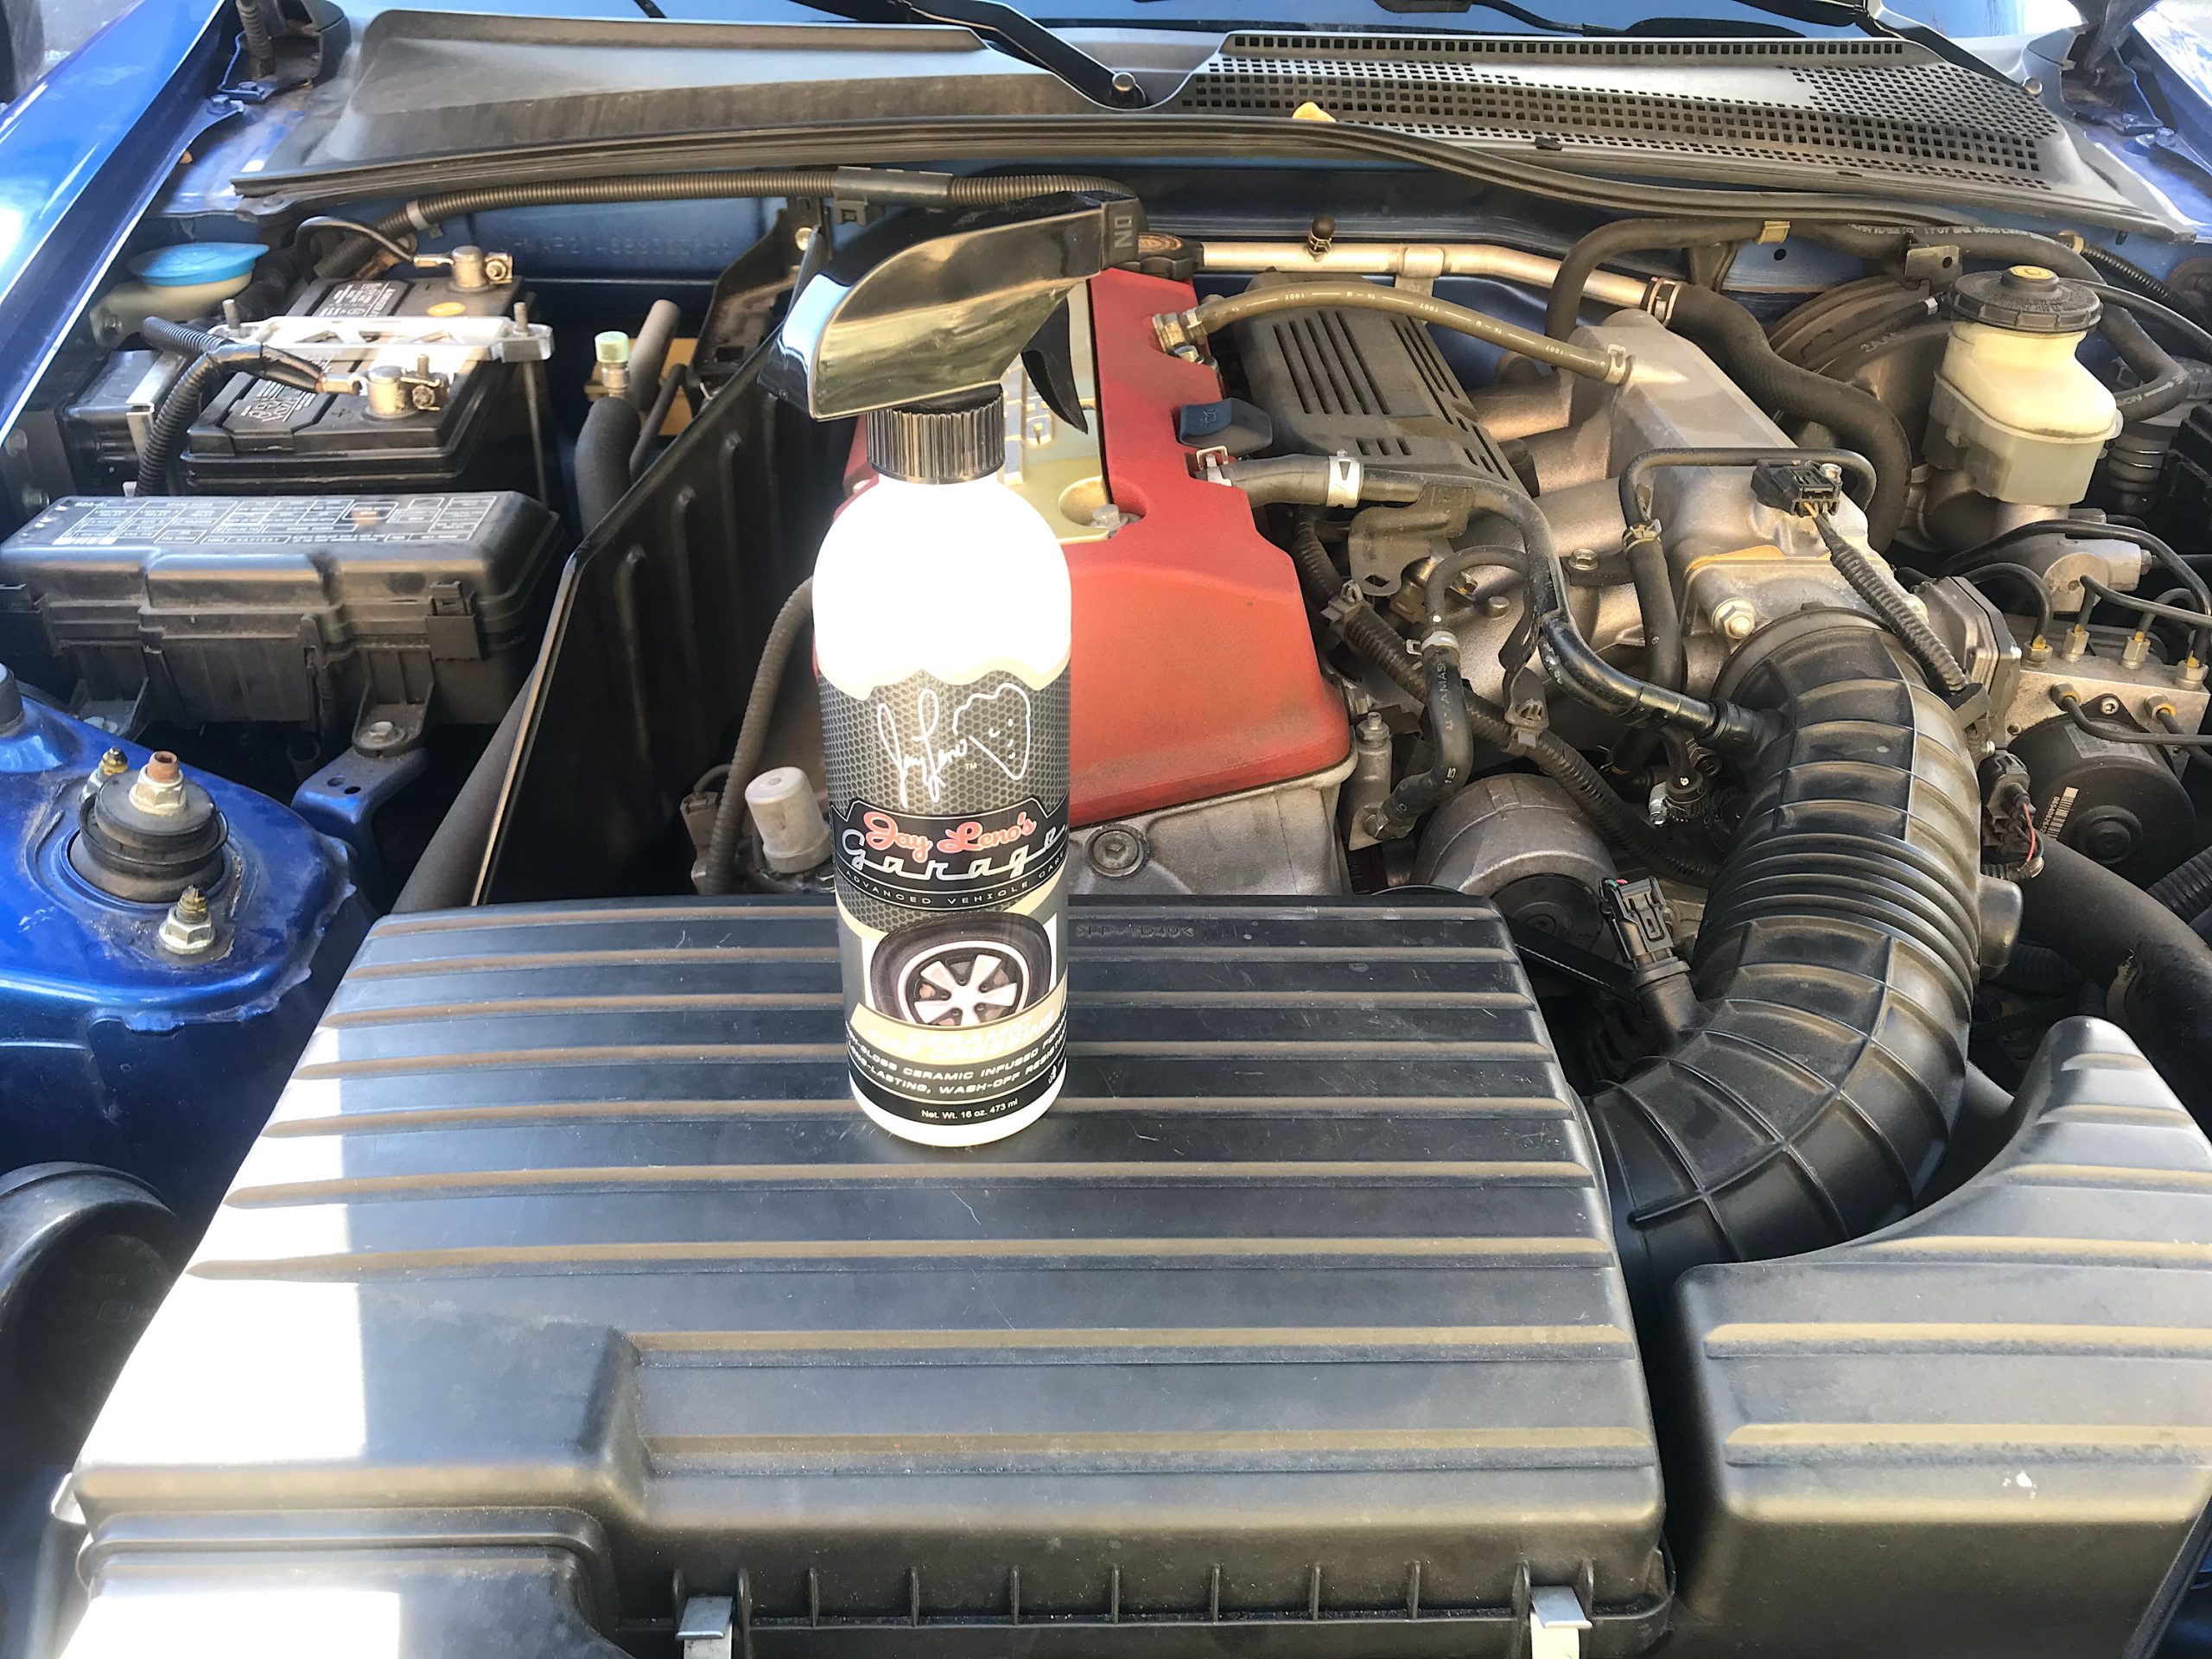 A bottle of Jay Leno's tire shine in an engine bay